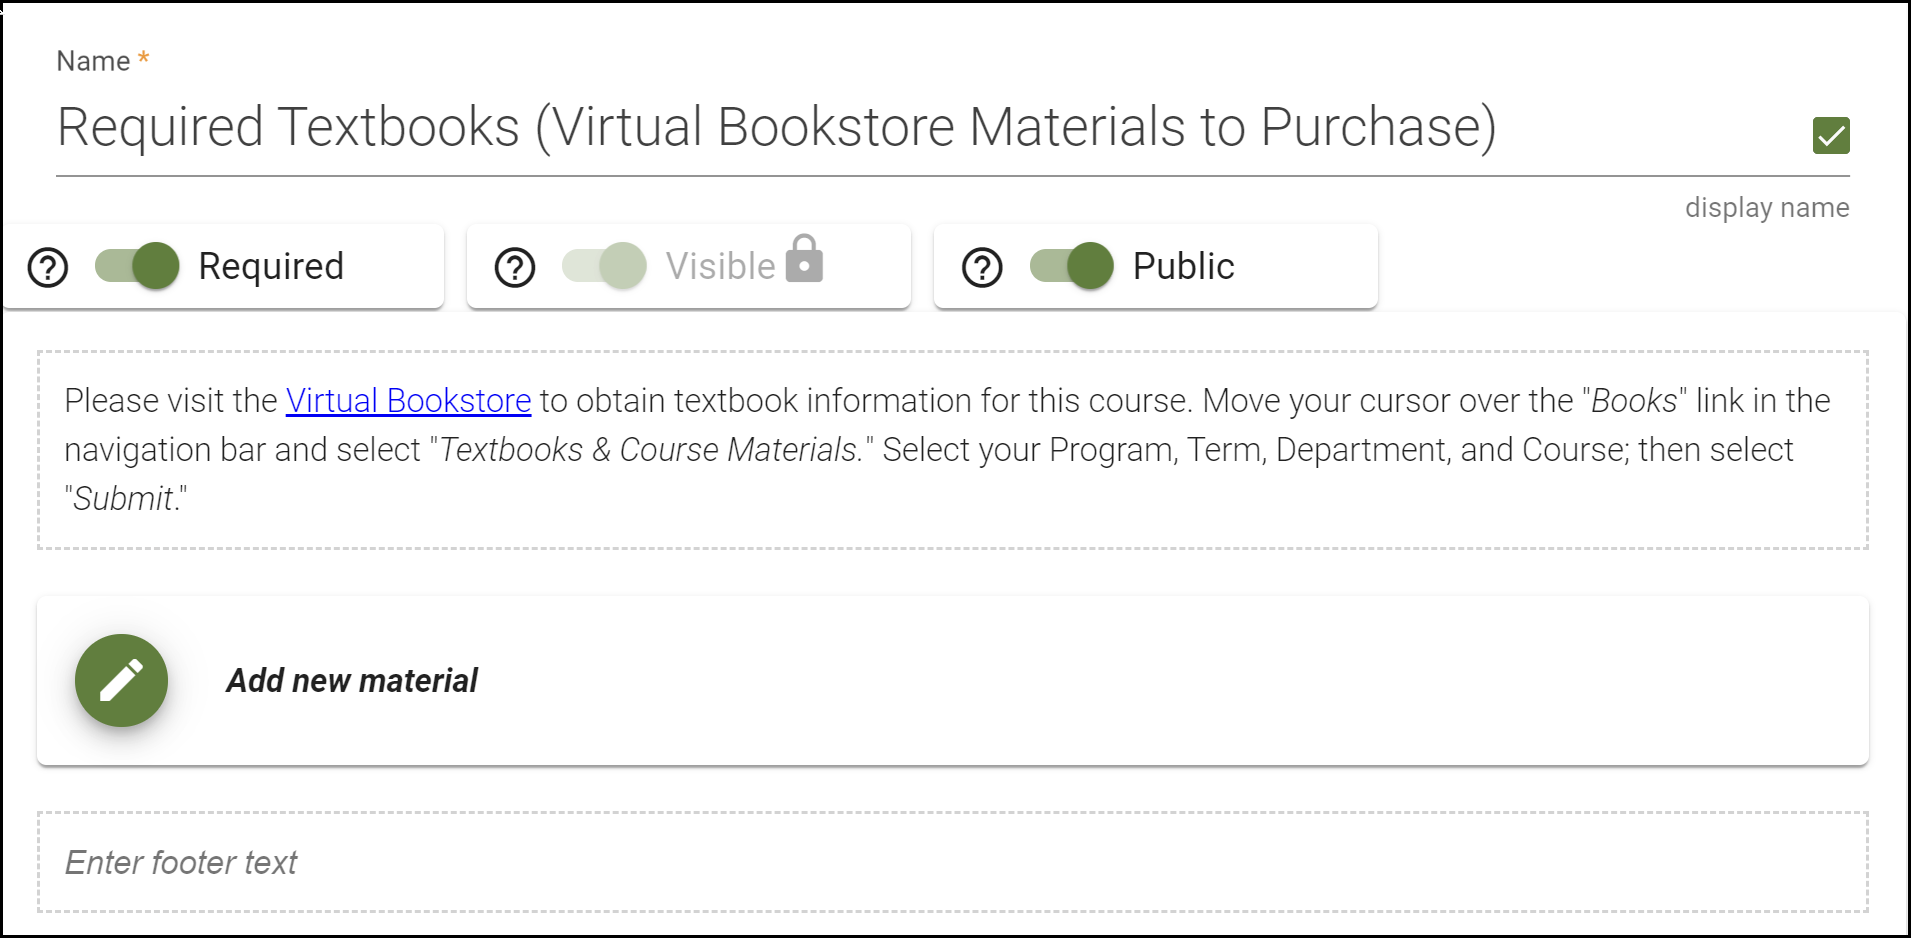 Required Textbook with Help Text provided in content. Link to Virtual Bookstore with directions to choose Program, Term, Department and Course.